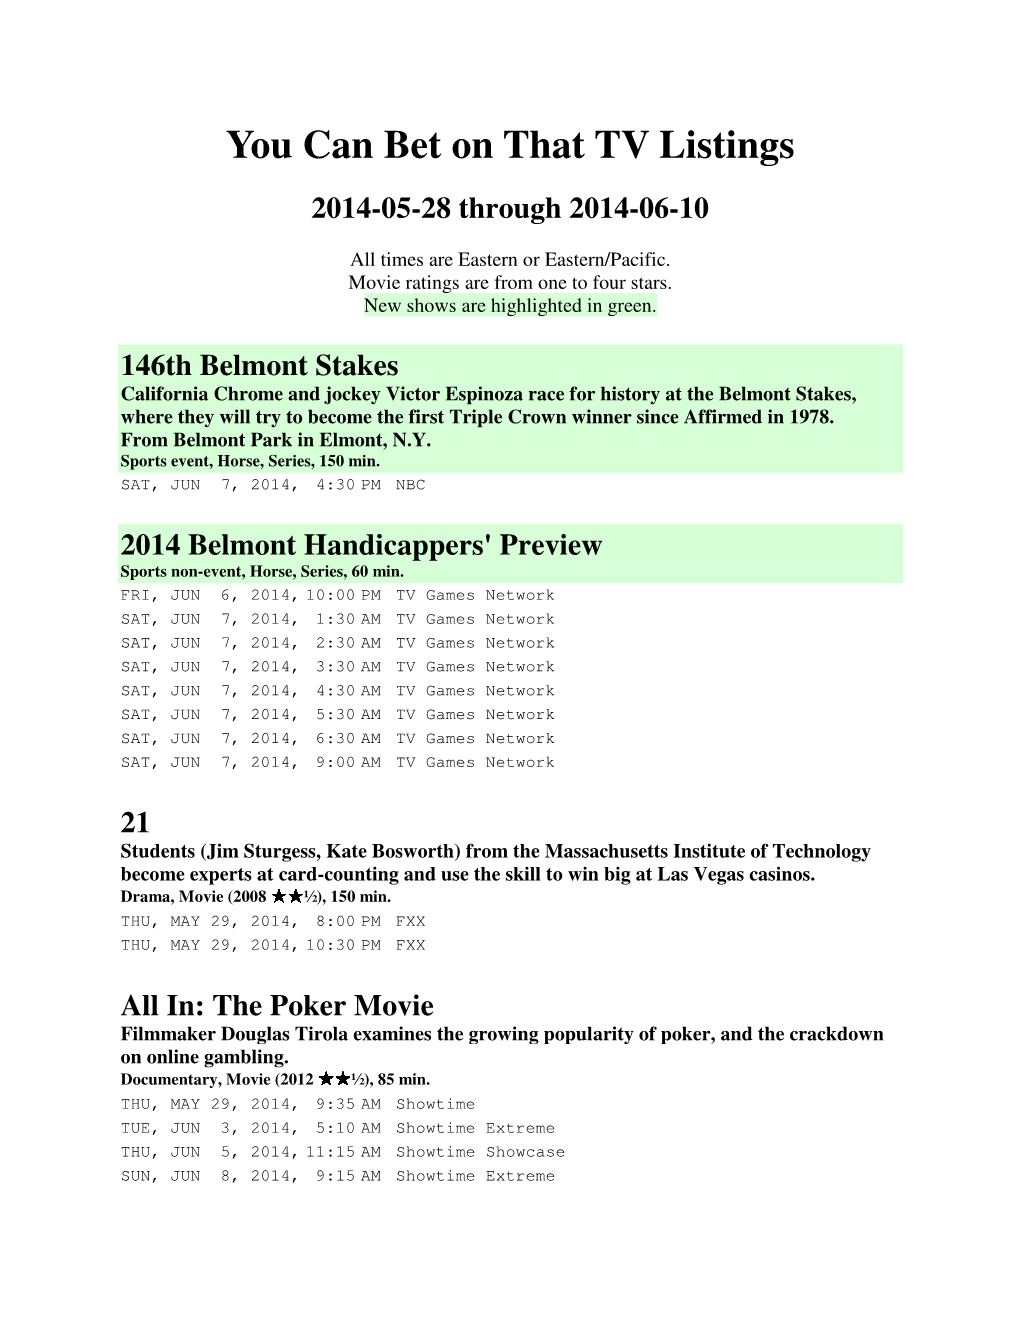 You Can Bet on That TV Listings 2014-05-28 Through 2014-06-10